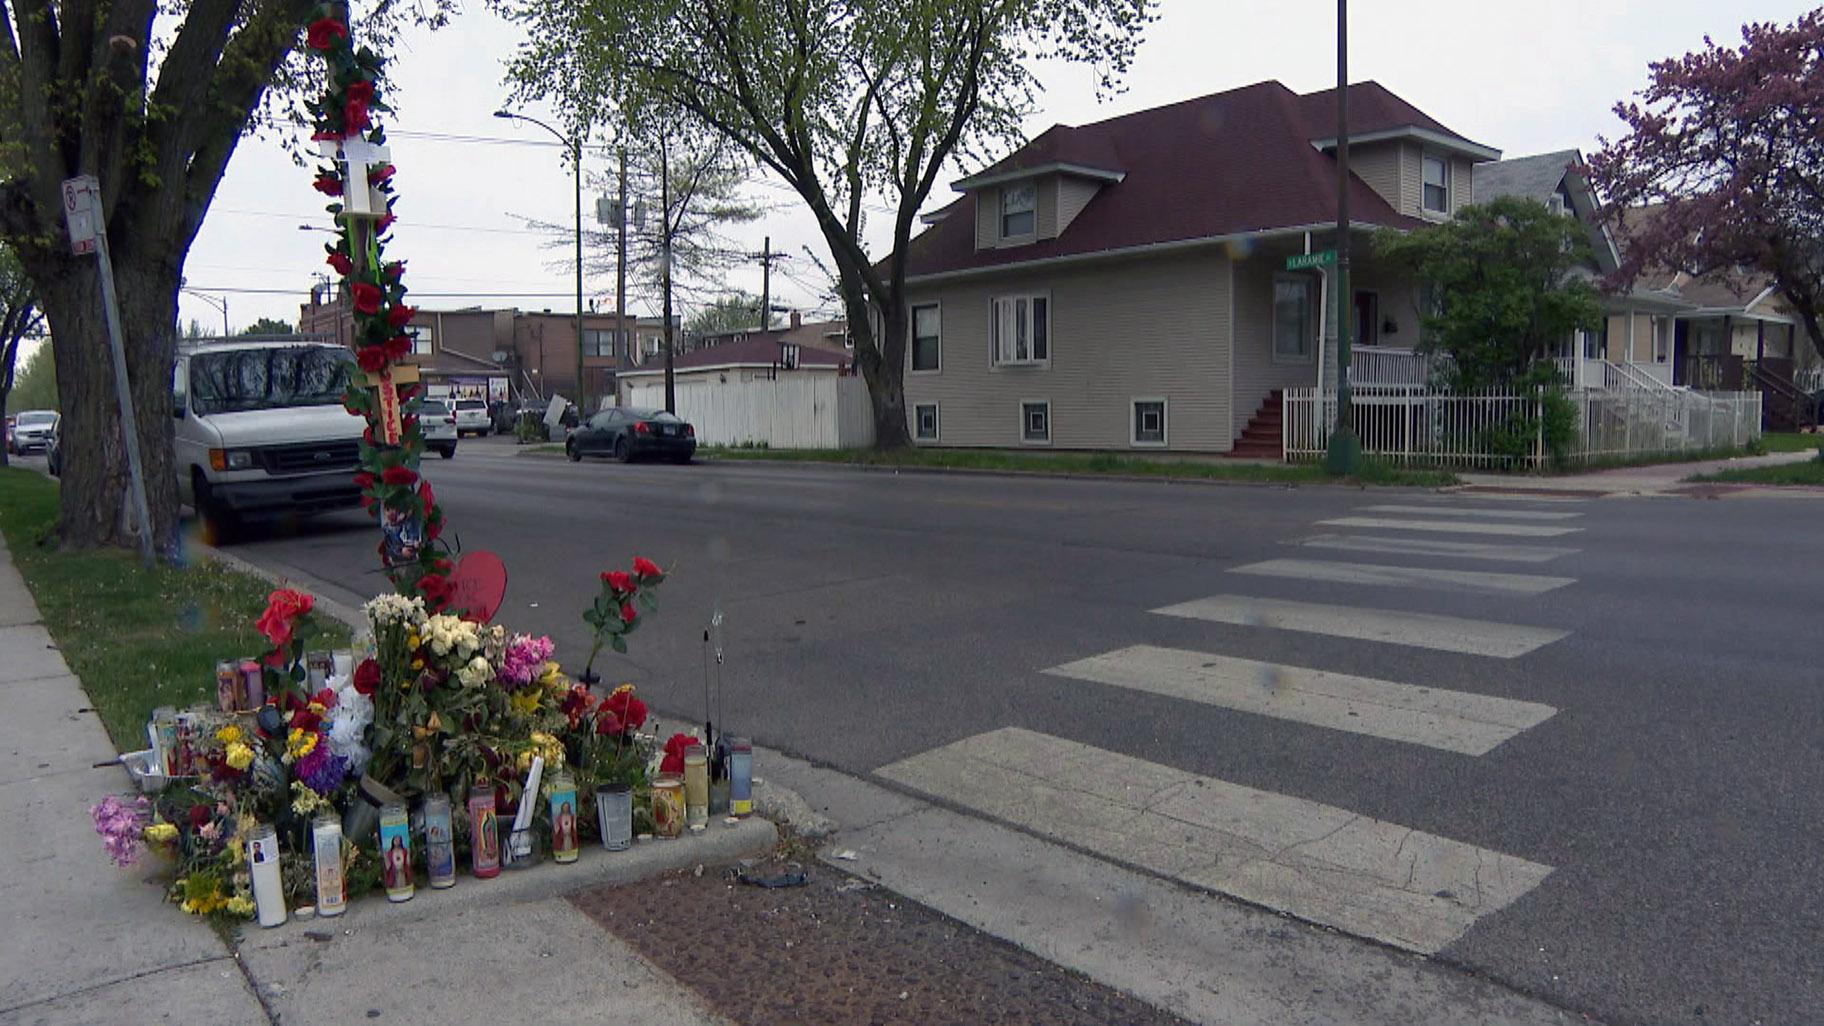 A memorial for Anthony Alvarez, the 22-year-old fatally shot by a Chicago police officer in Portage Park on March 31, 2021, is seen on April 28, the day police body camera video was released of the shooting. (WTTW News)